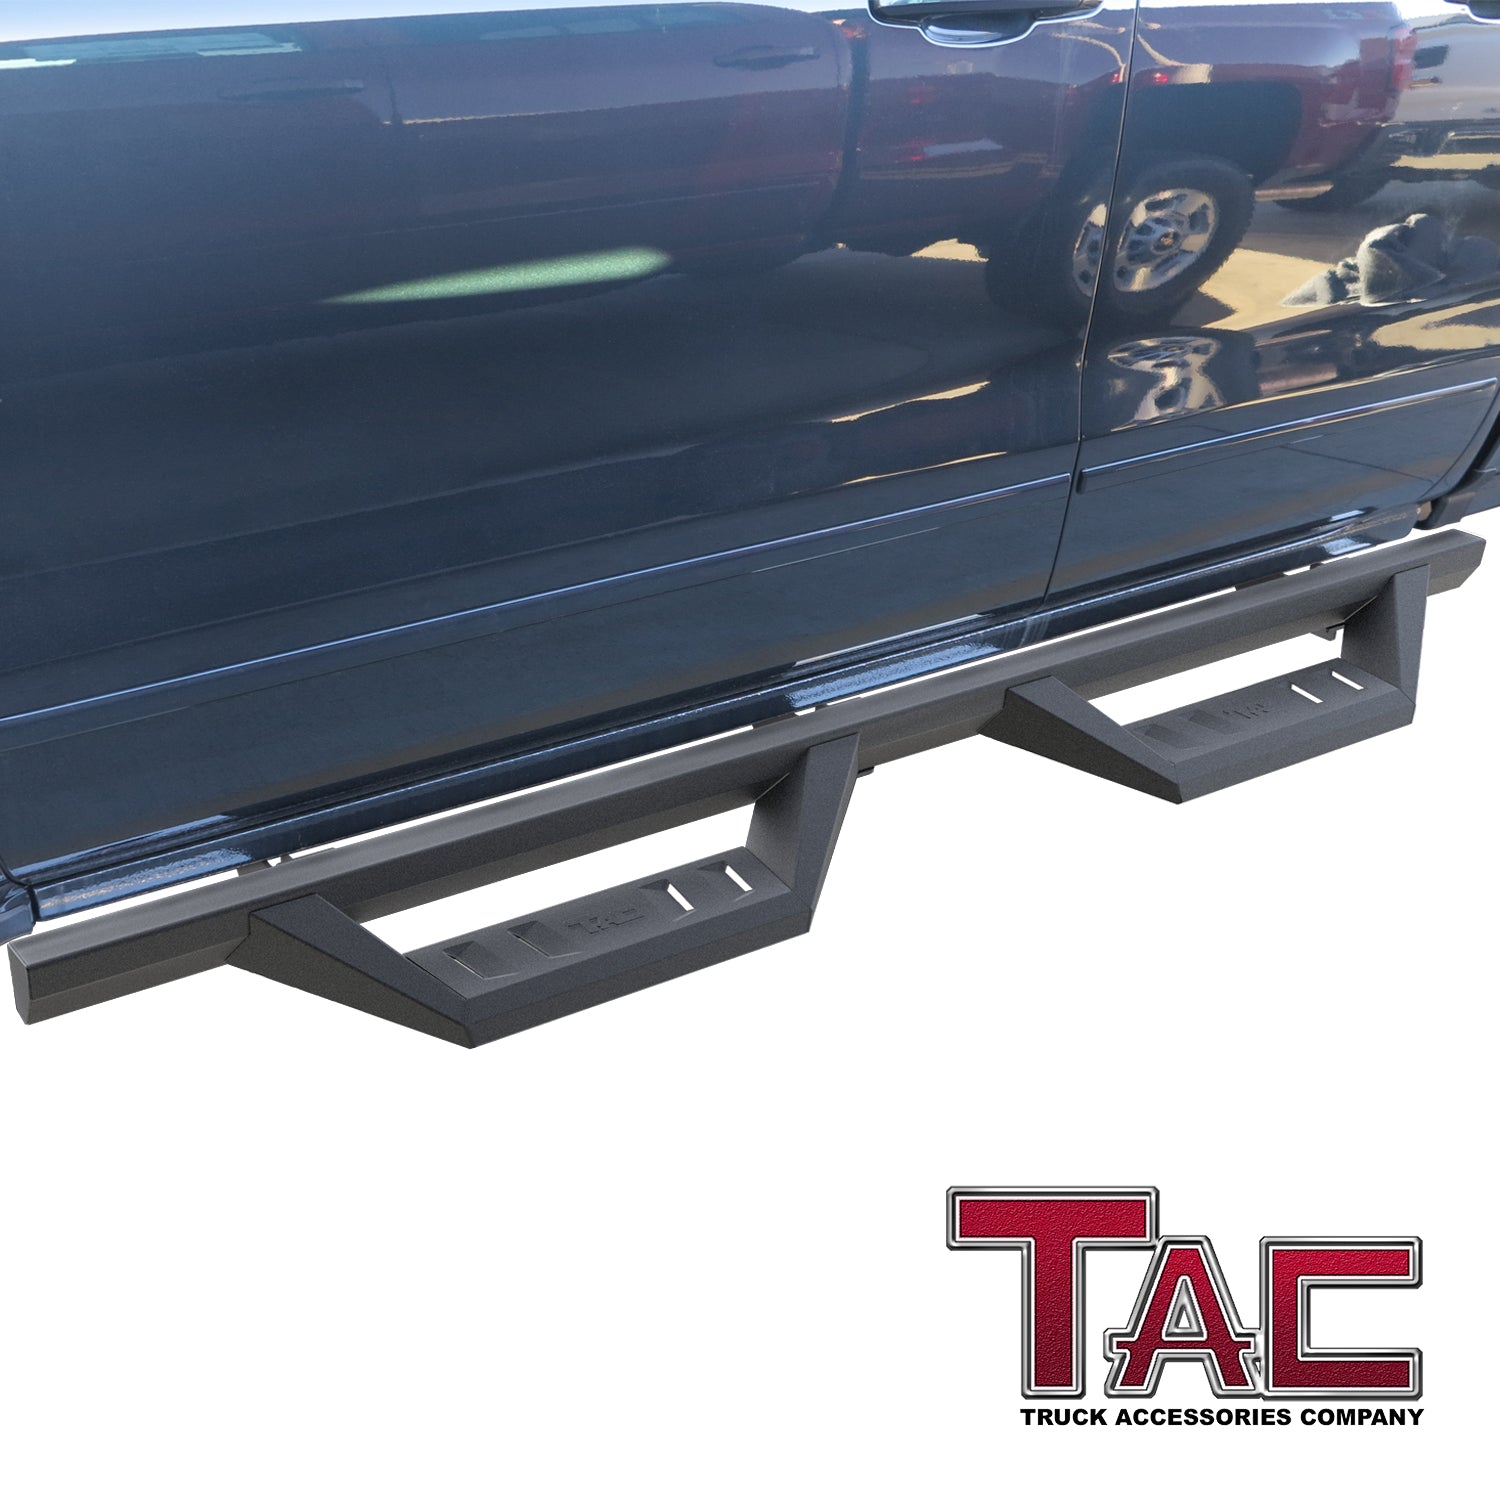 TAC Sidewinder Running Boards Fit 2007-2018 Chevy Silverado/GMC Sierra 1500|2007-2019 2500/3500 Extended Double Cab 4” Drop Fine Texture Black Side Steps Nerf Bars Rock Slider Armor Off-Road (2pcs) - 0